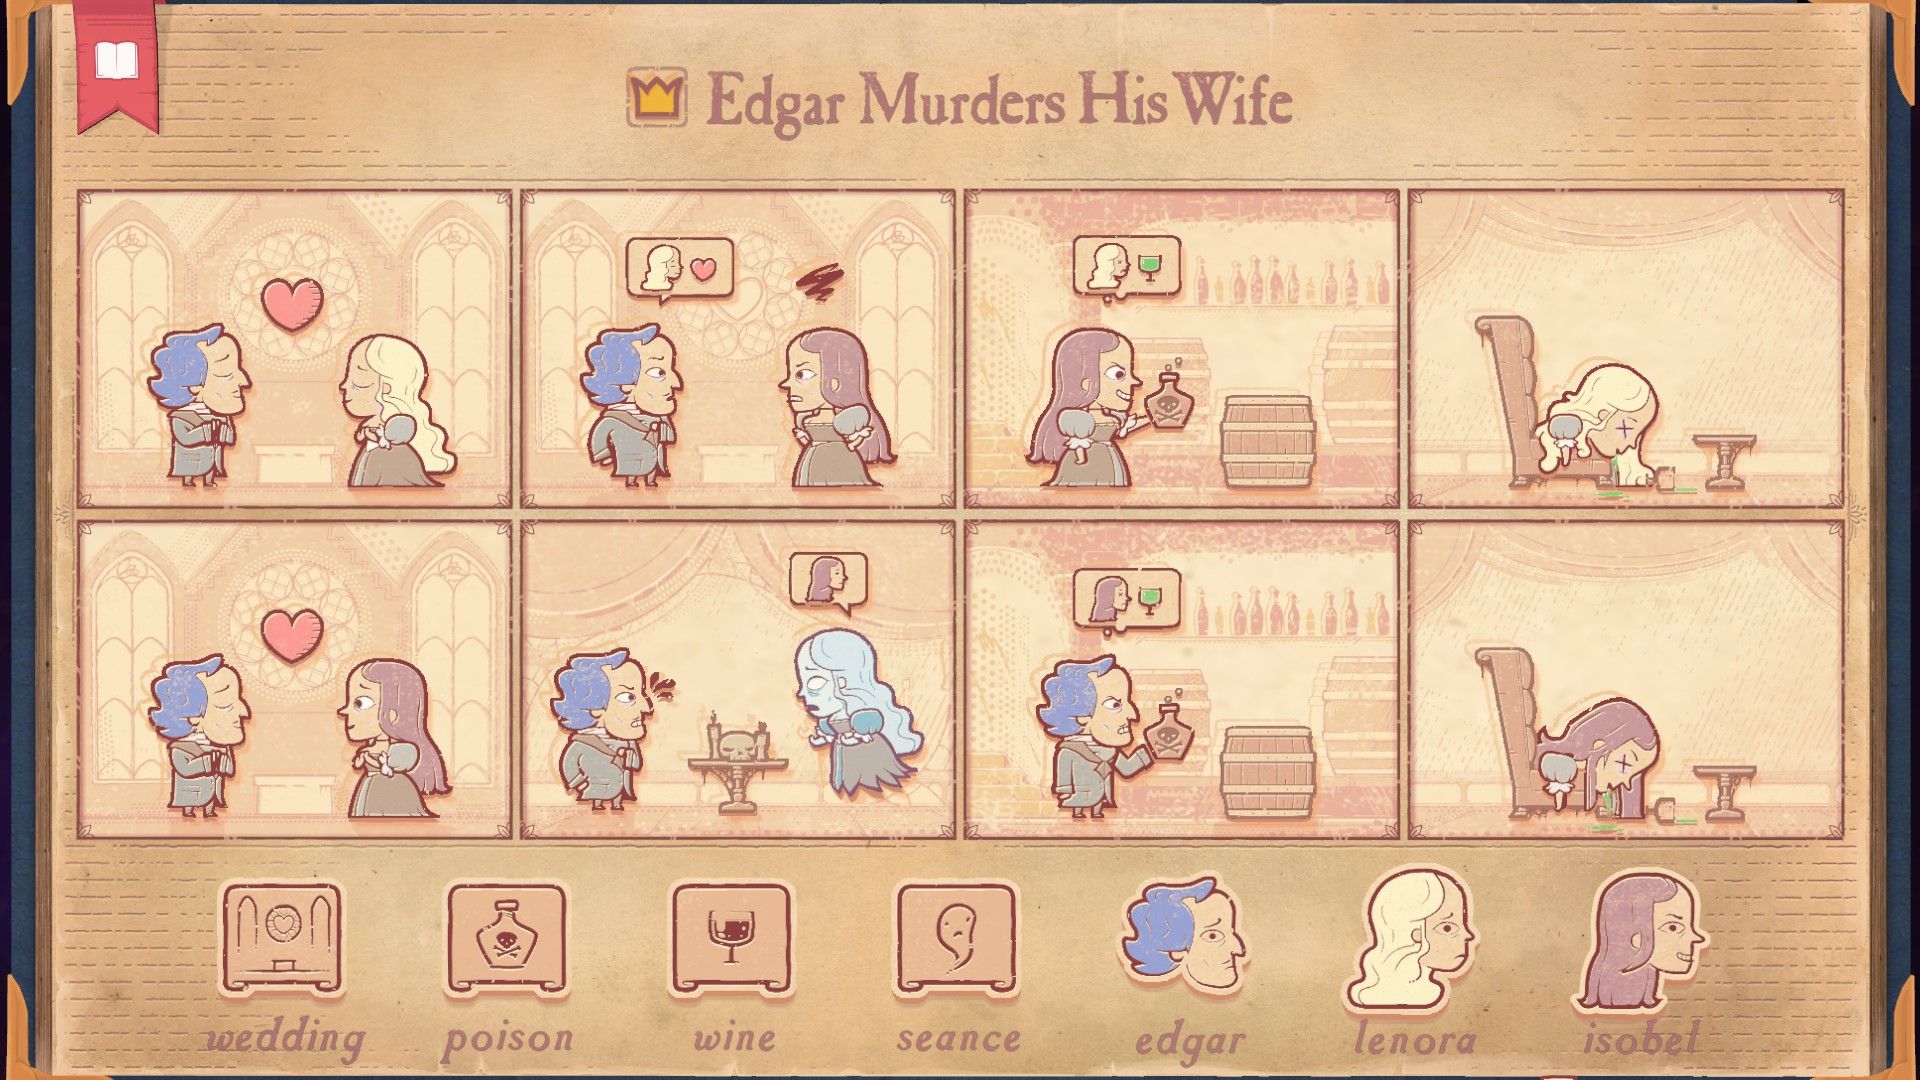 The solution for the Mad Husband section of Storyteller, showing Edgar killing his wife.